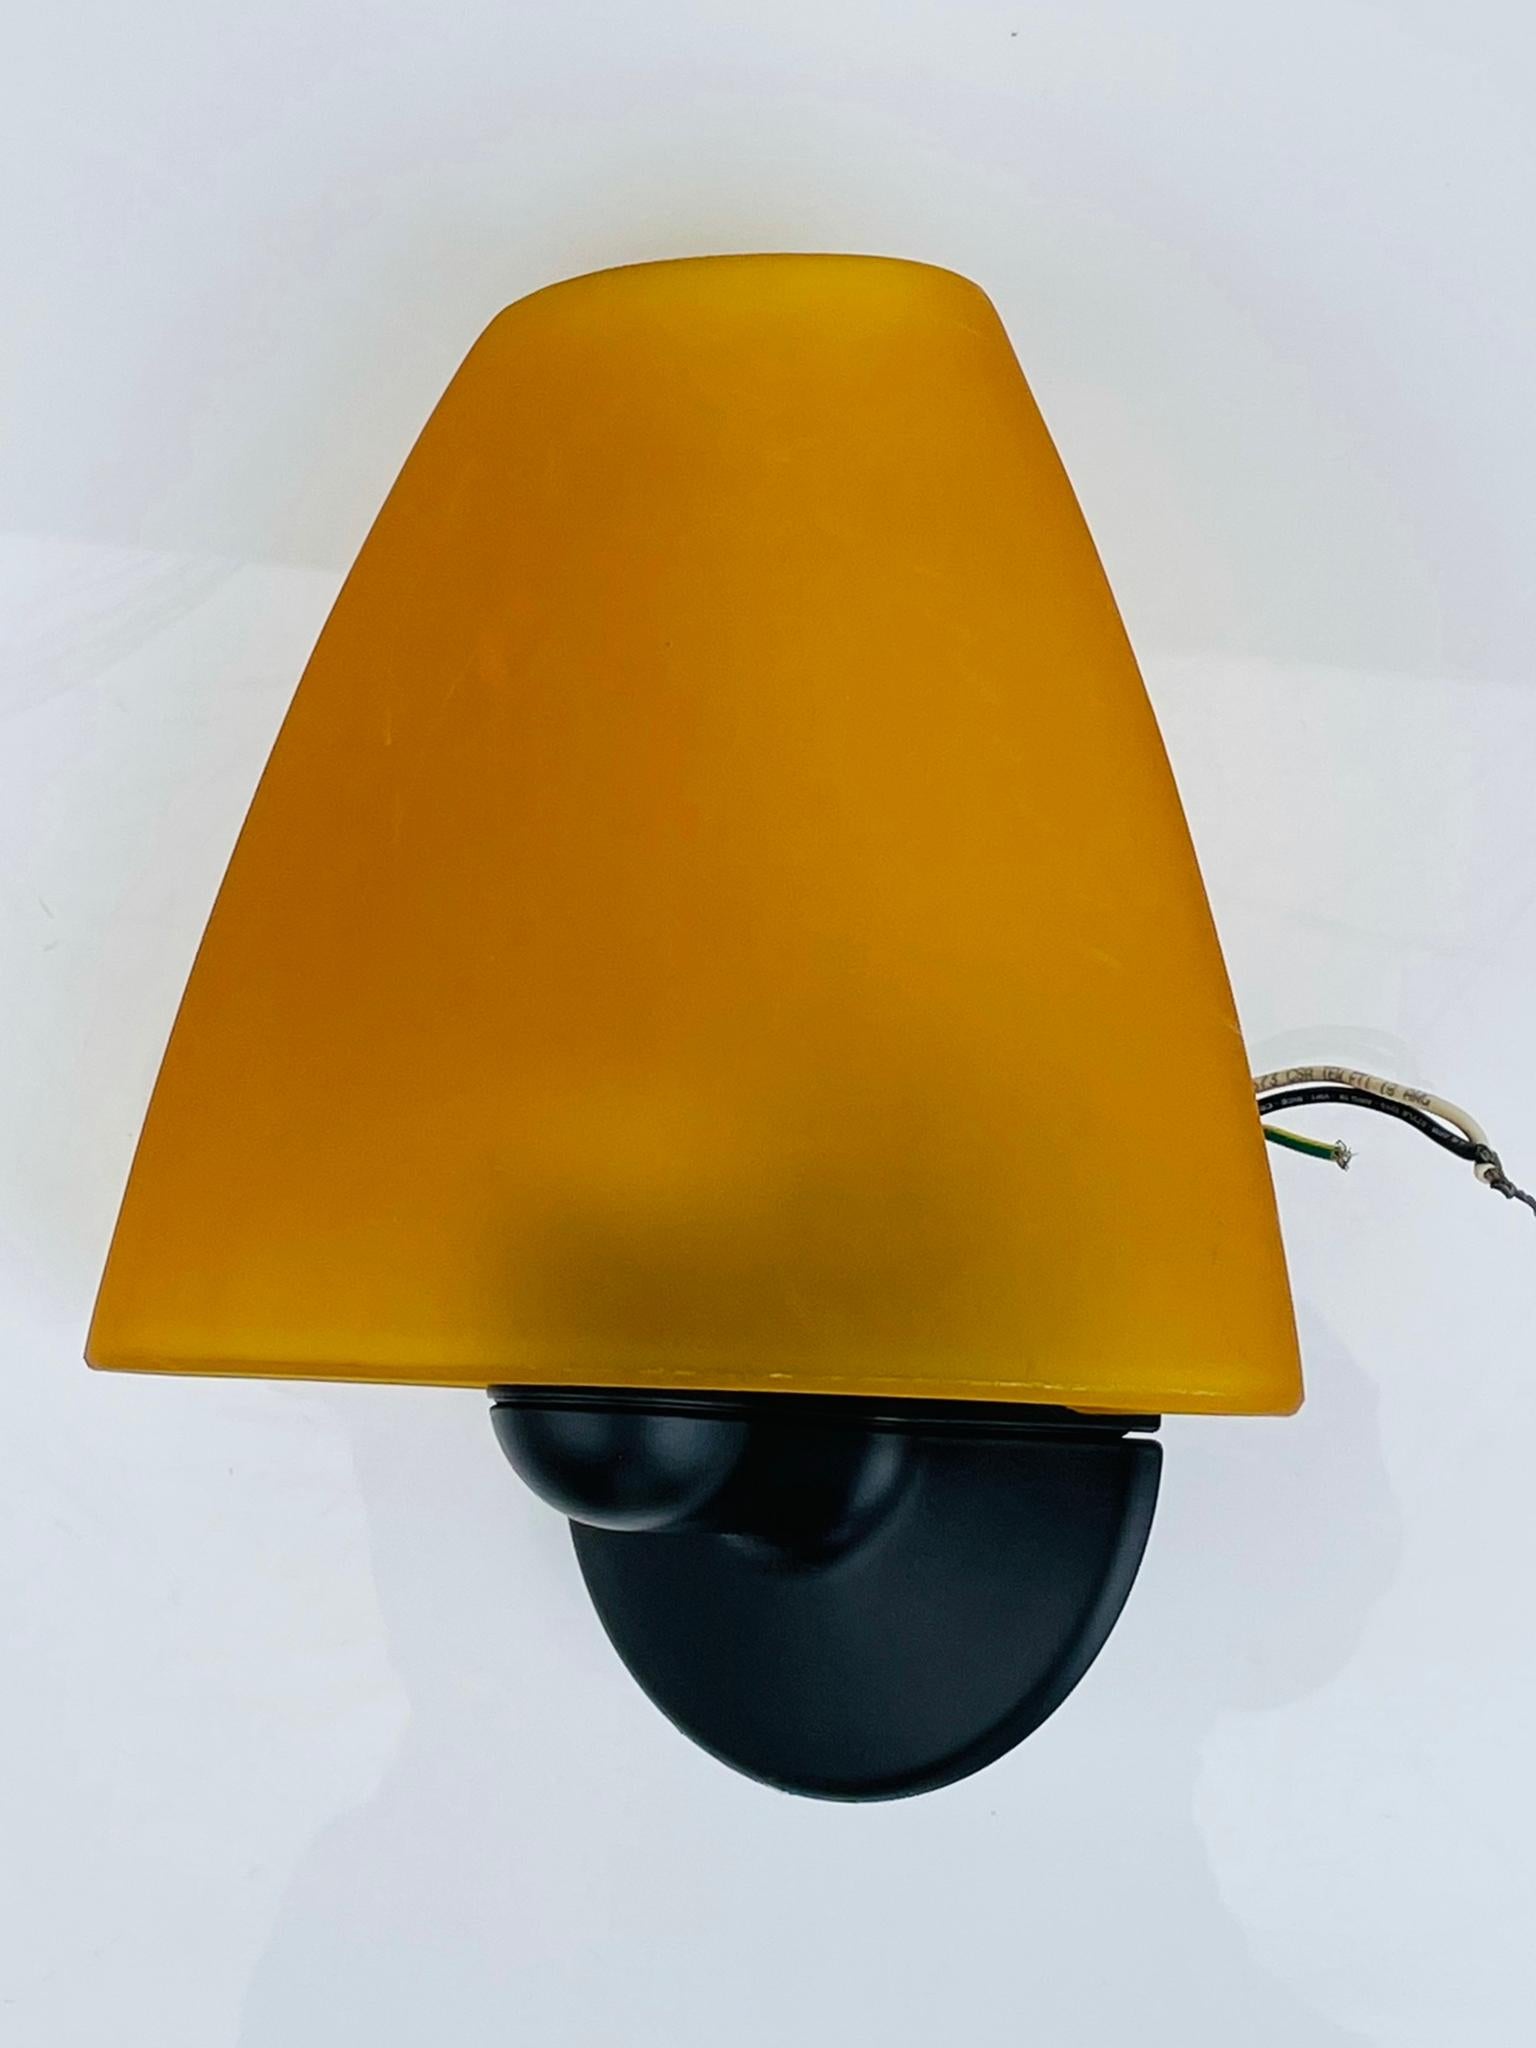 Vintage wall sconce designed by Marcello Ziliani in the 1990s and manufactured by Flos.
The Sally wall sconce has a glass shade and a metal bracket with a black finish.
The piece retains the Flos label.

One small chip the the upper